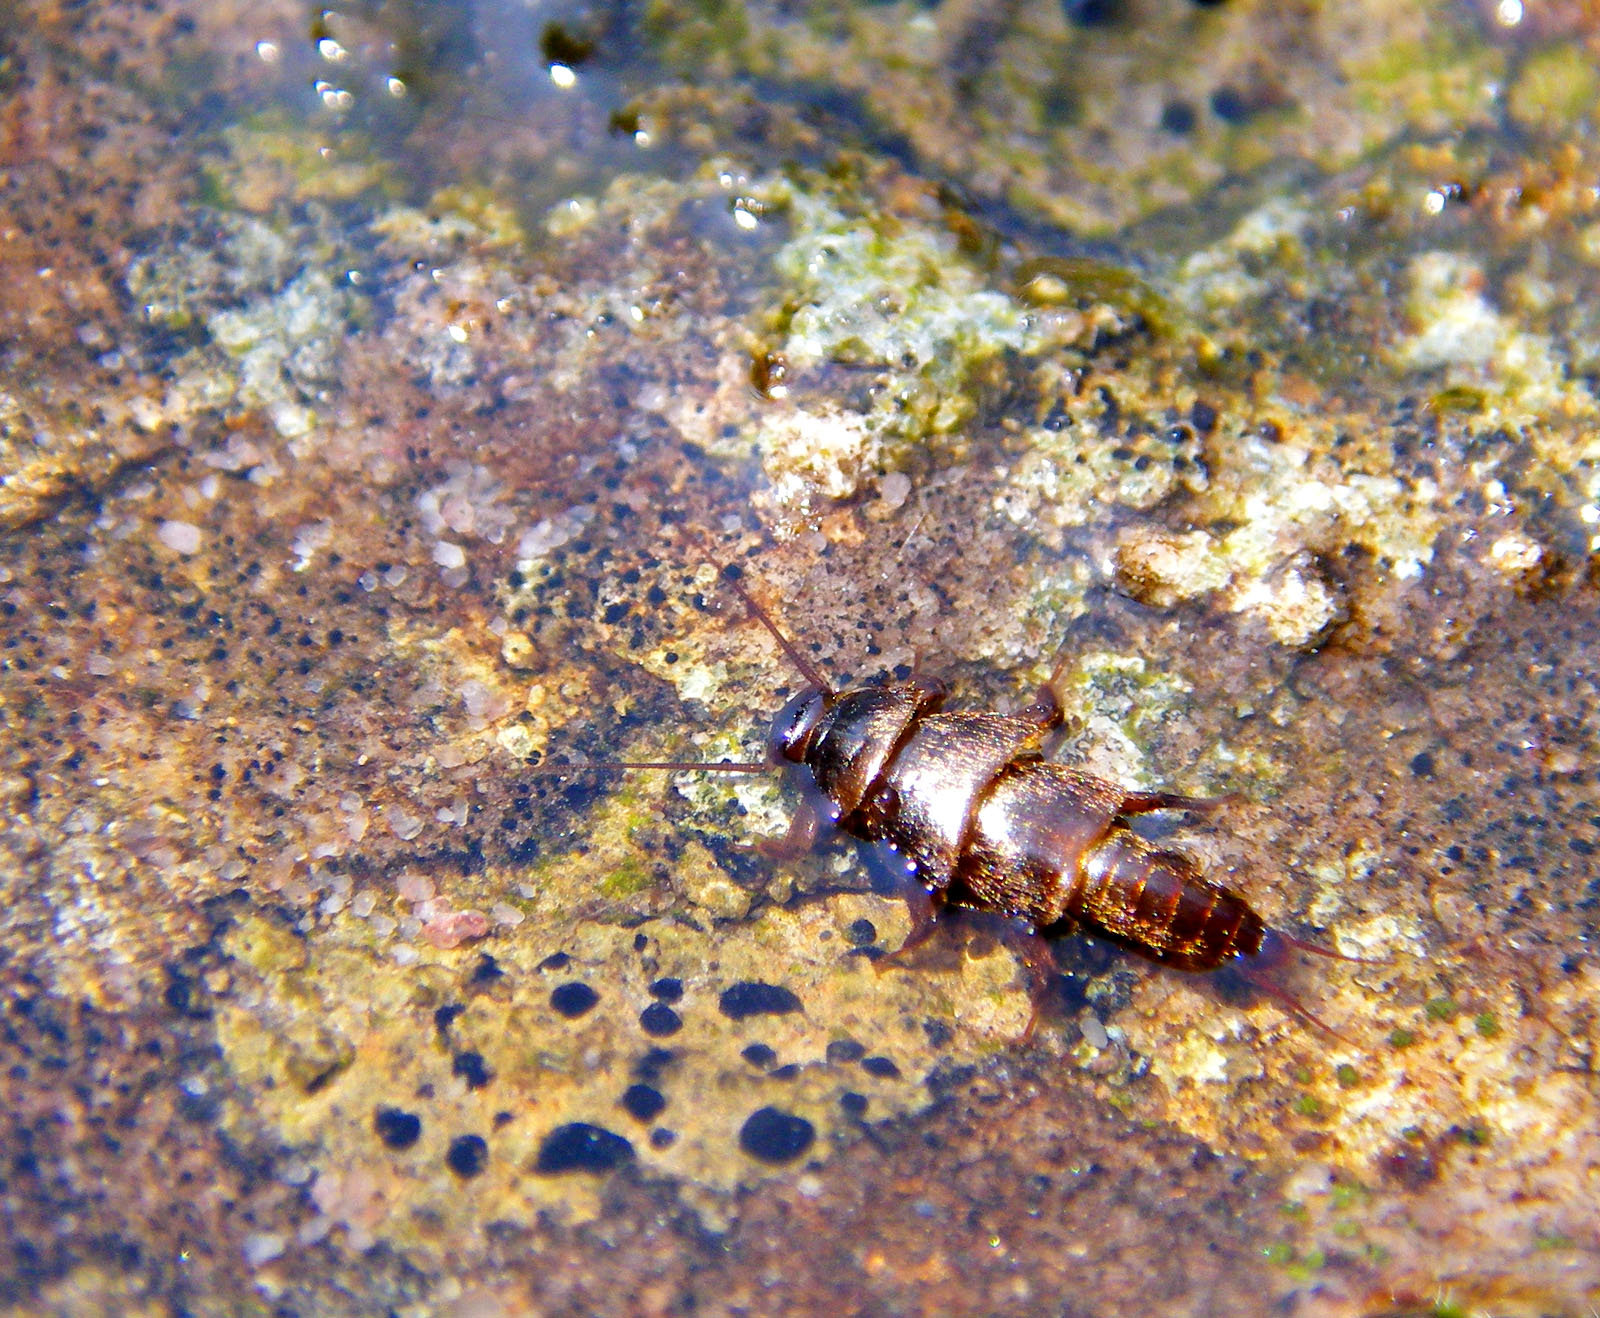 This Peltoperlid stonefly (roachfly) was crawling around on this rock looking for a comfortable place to emerge. From Mystery Creek # 42 in Pennsylvania.